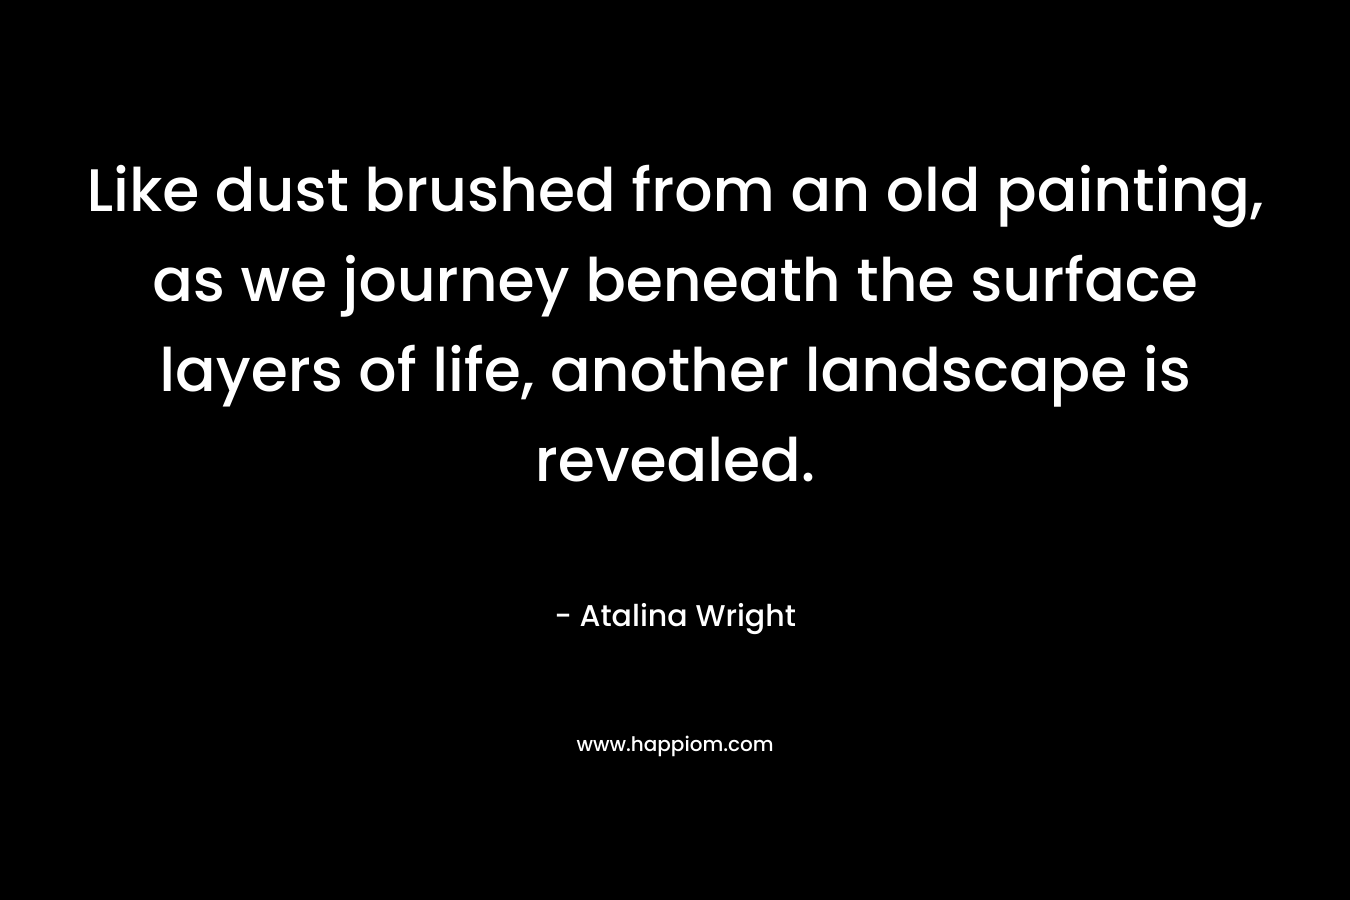 Like dust brushed from an old painting, as we journey beneath the surface layers of life, another landscape is revealed. – Atalina Wright